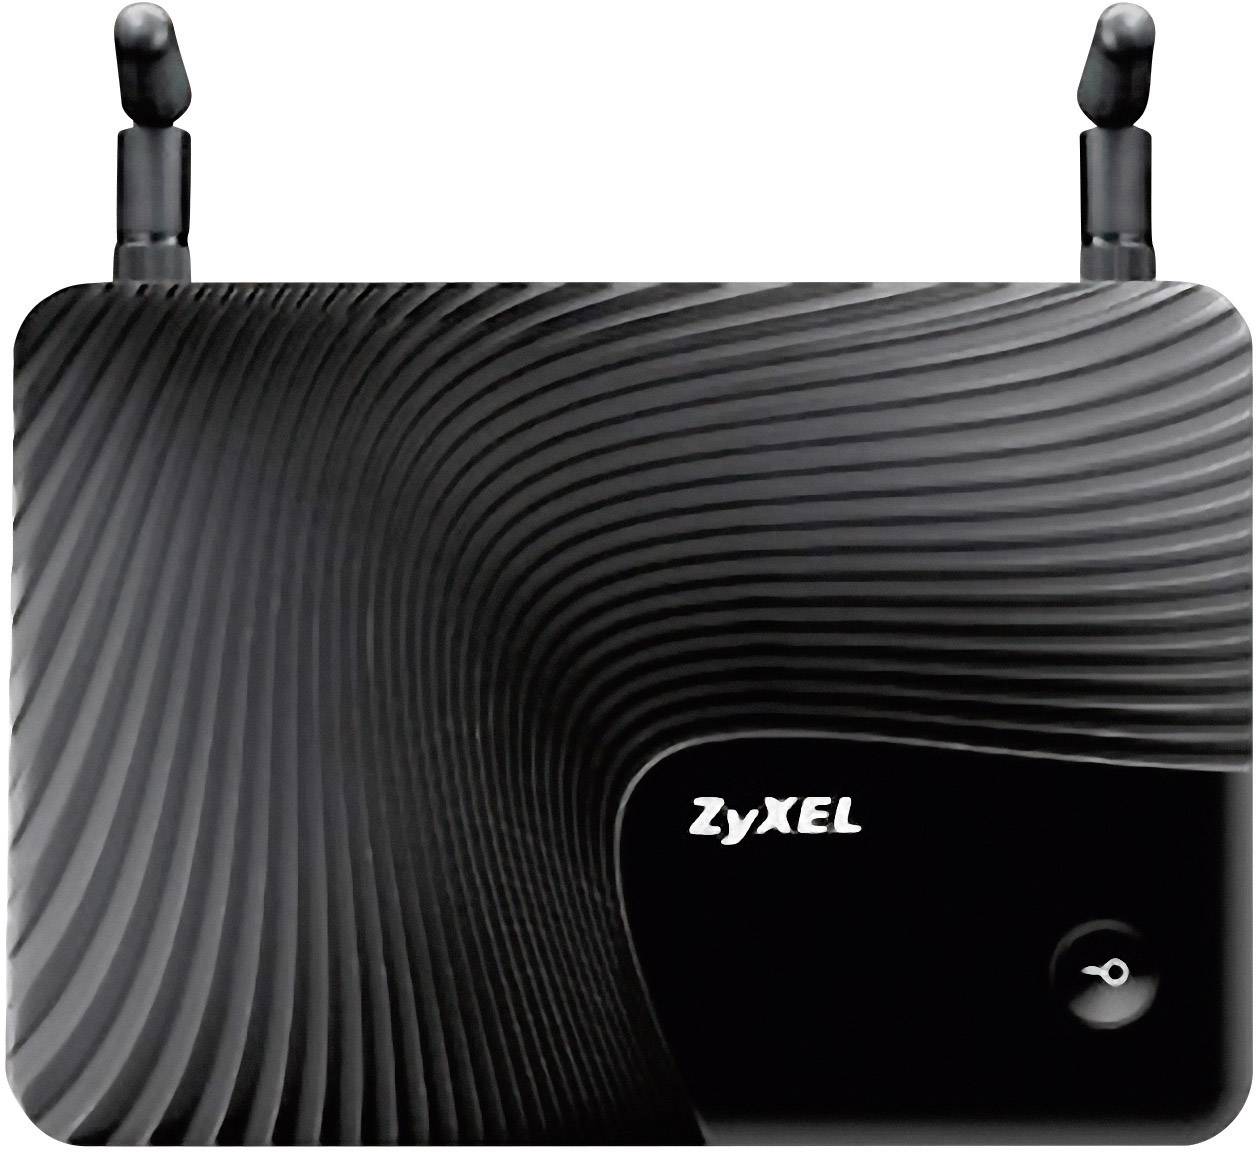 Zyxel NBG6503 Simultaneous Dual-Band Wireless AC750 Home Router